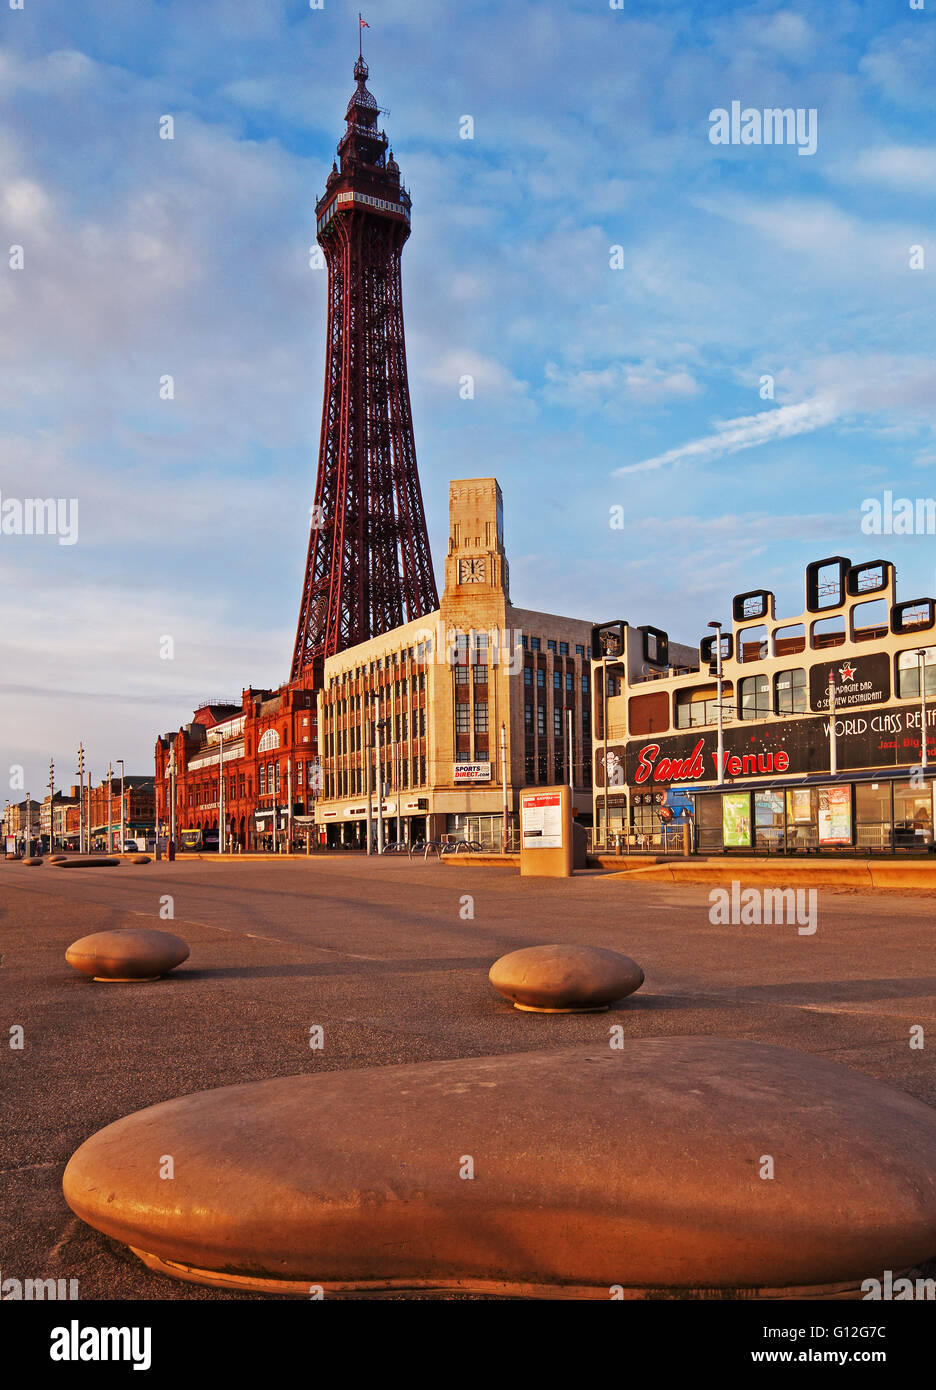 Viewing the refurbished tower from Blackpool's promenade, in warm evening light Stock Photo